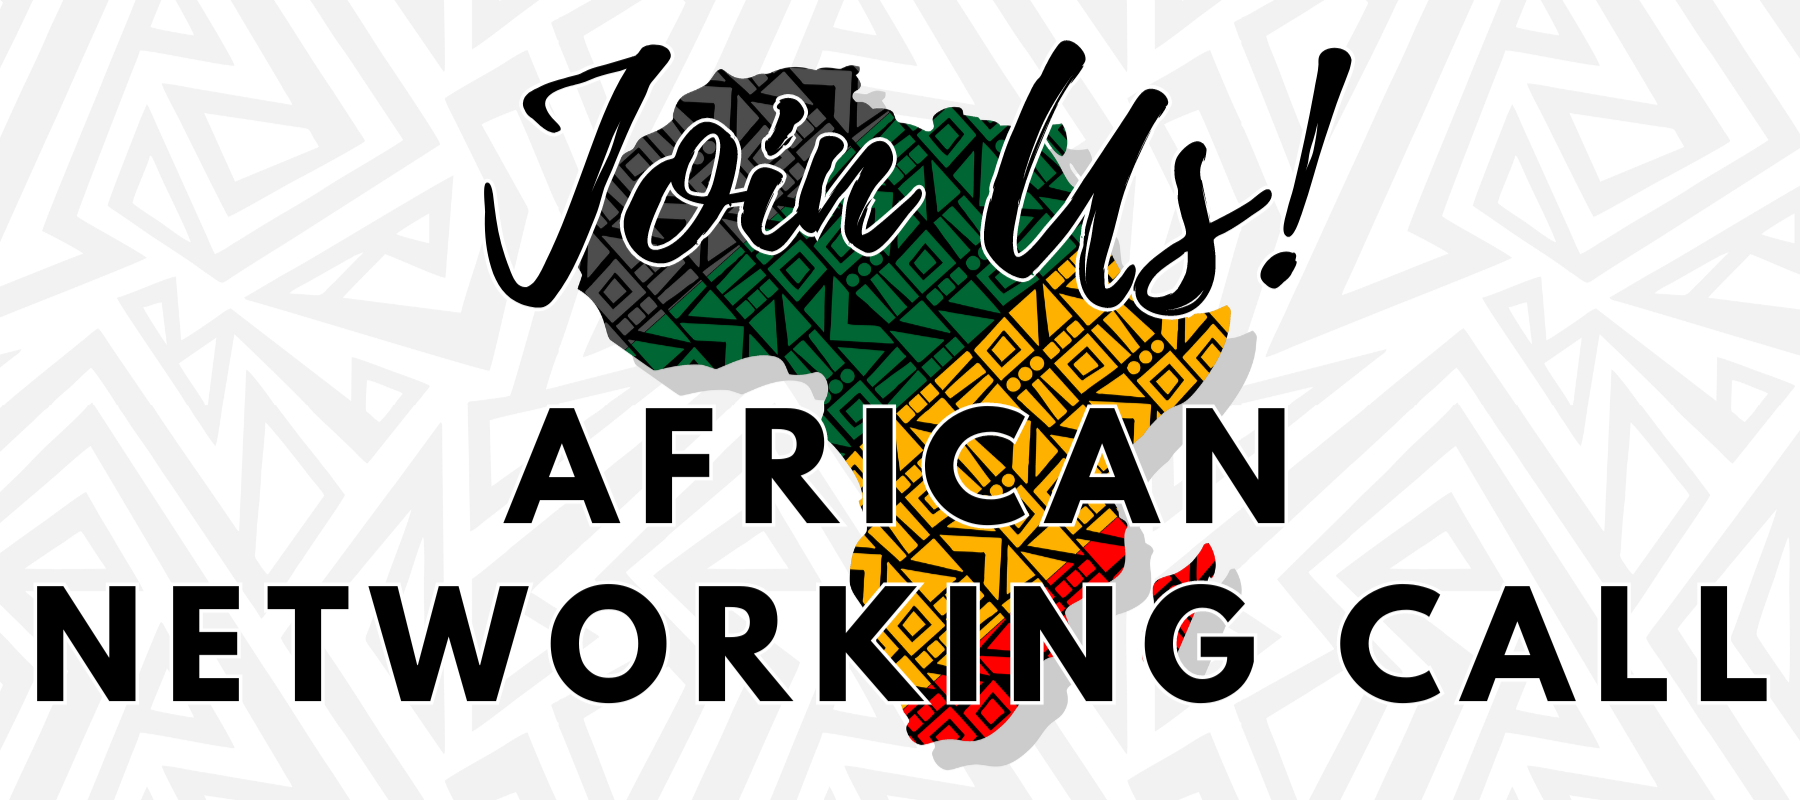 African Networking Call